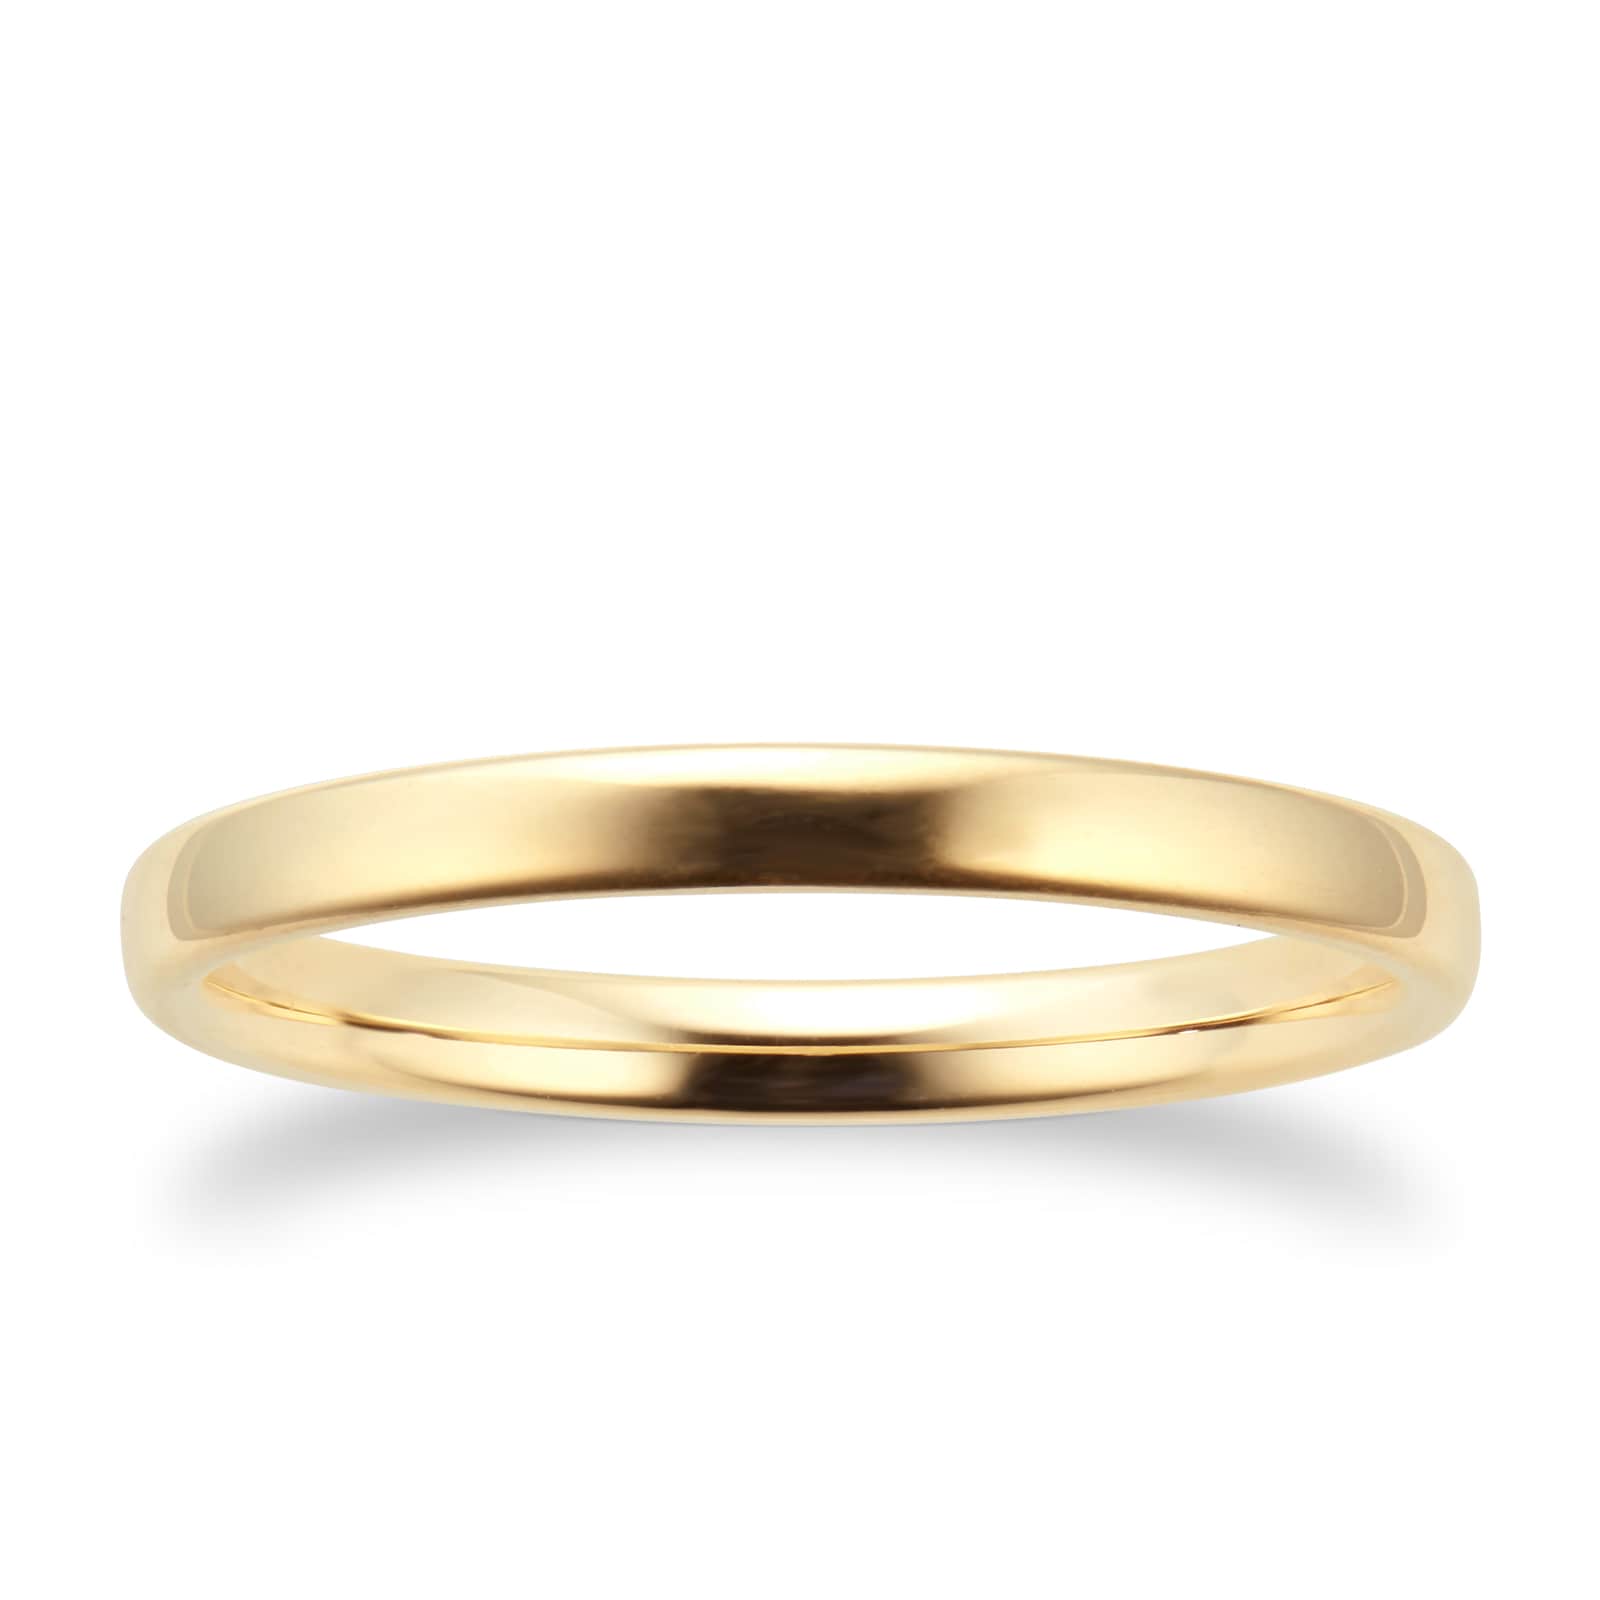 2mm Slight Court Standard Wedding Ring In 9 Carat Yellow Gold Ring Size R